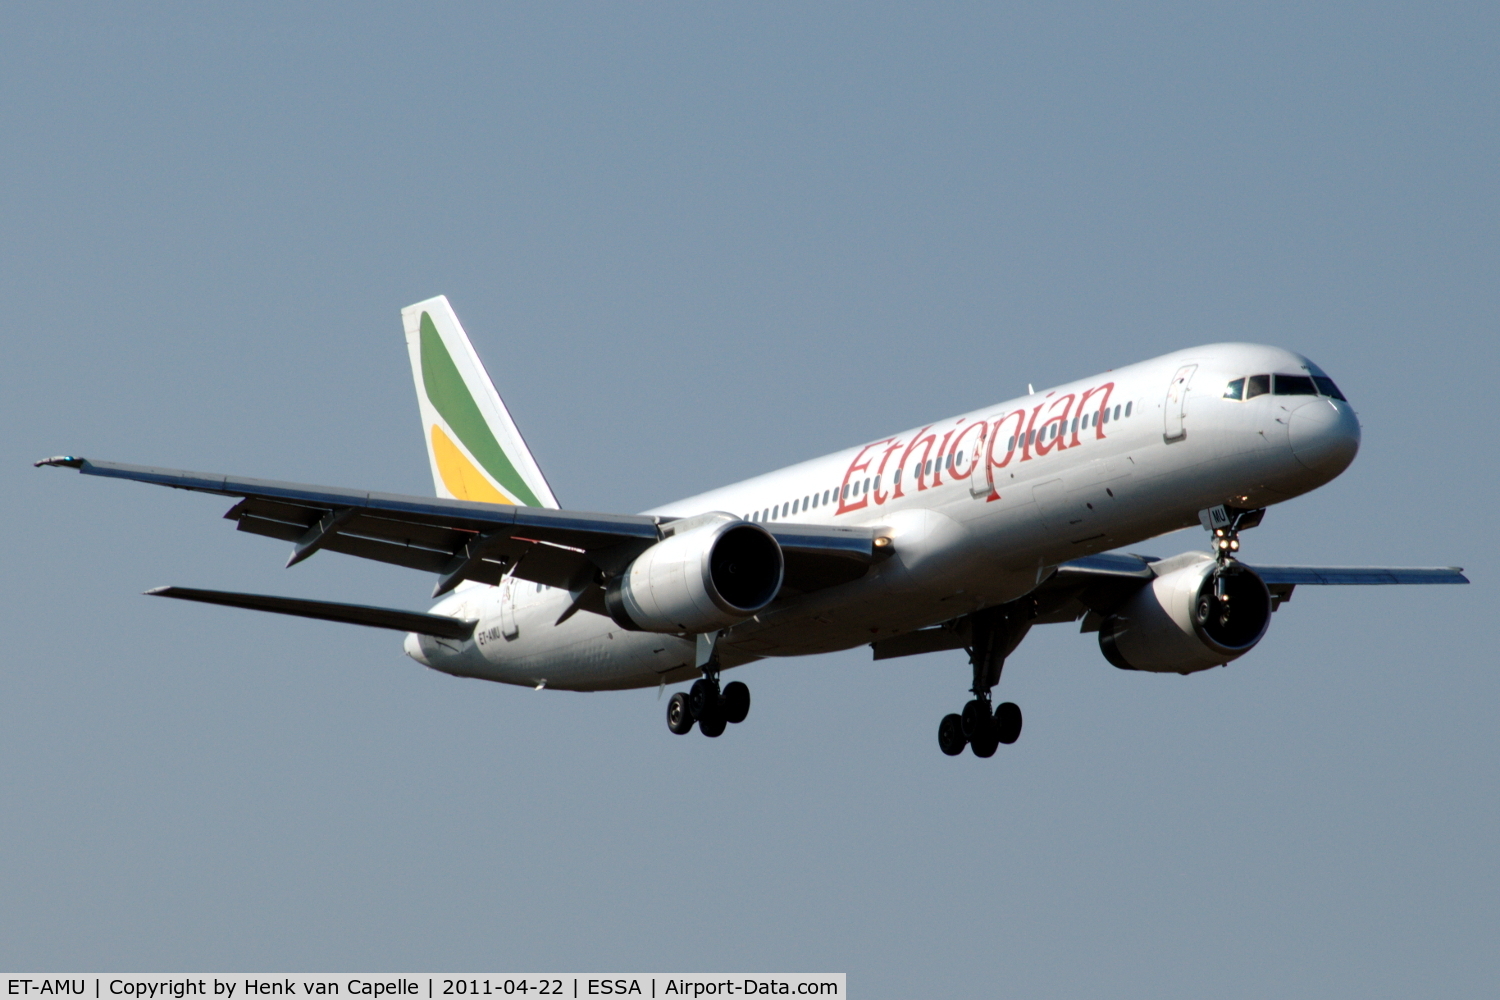 ET-AMU, 1997 Boeing 757-23N C/N 27975, Boeing 757-200 of Ethiopian Airlines about to land at Stockholm Arlanda airport.